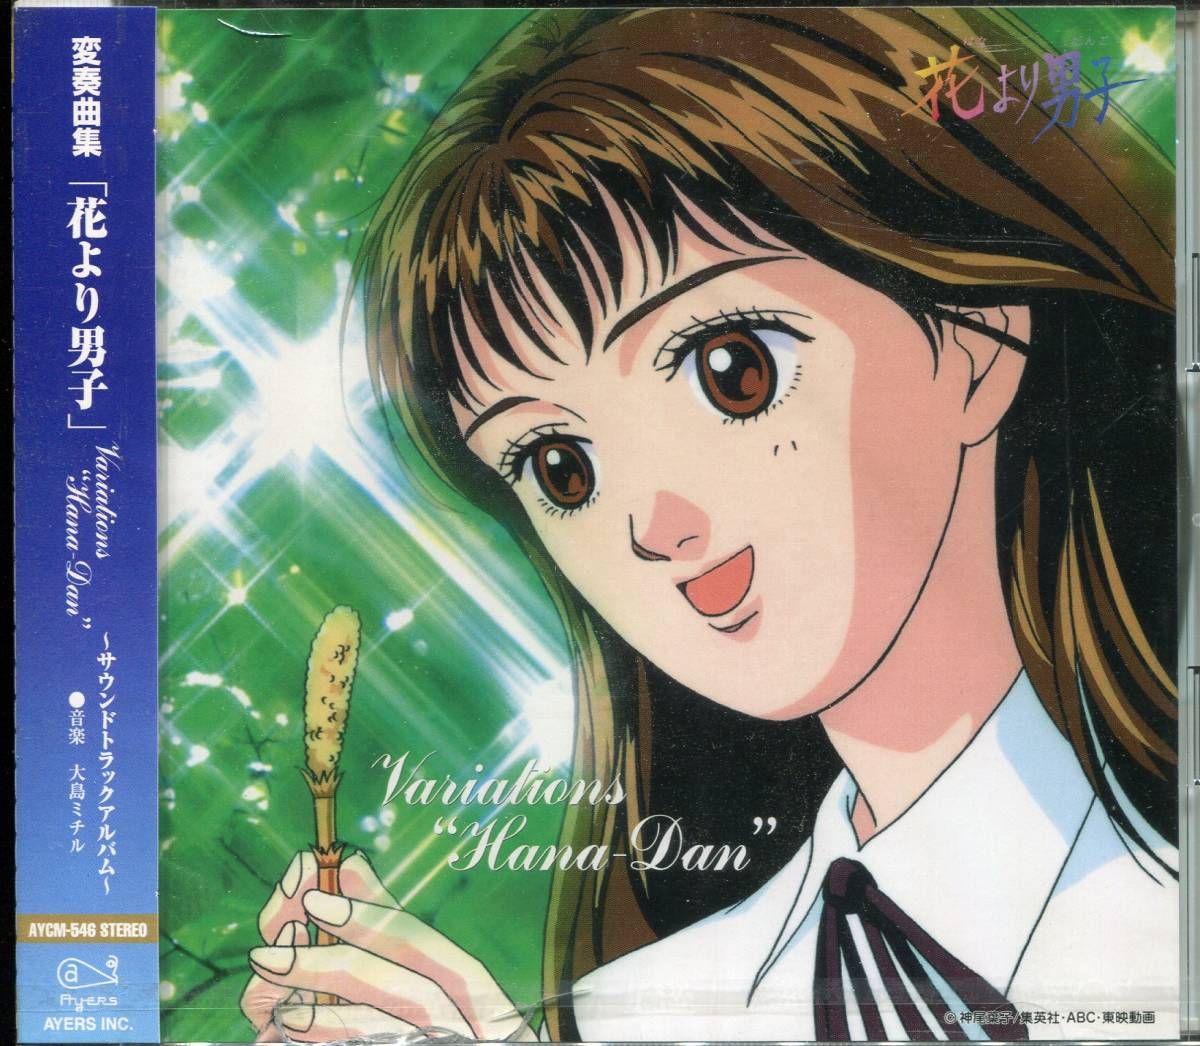 This is an offer made on the Request: Hana Yori Dango CD Soundtrack